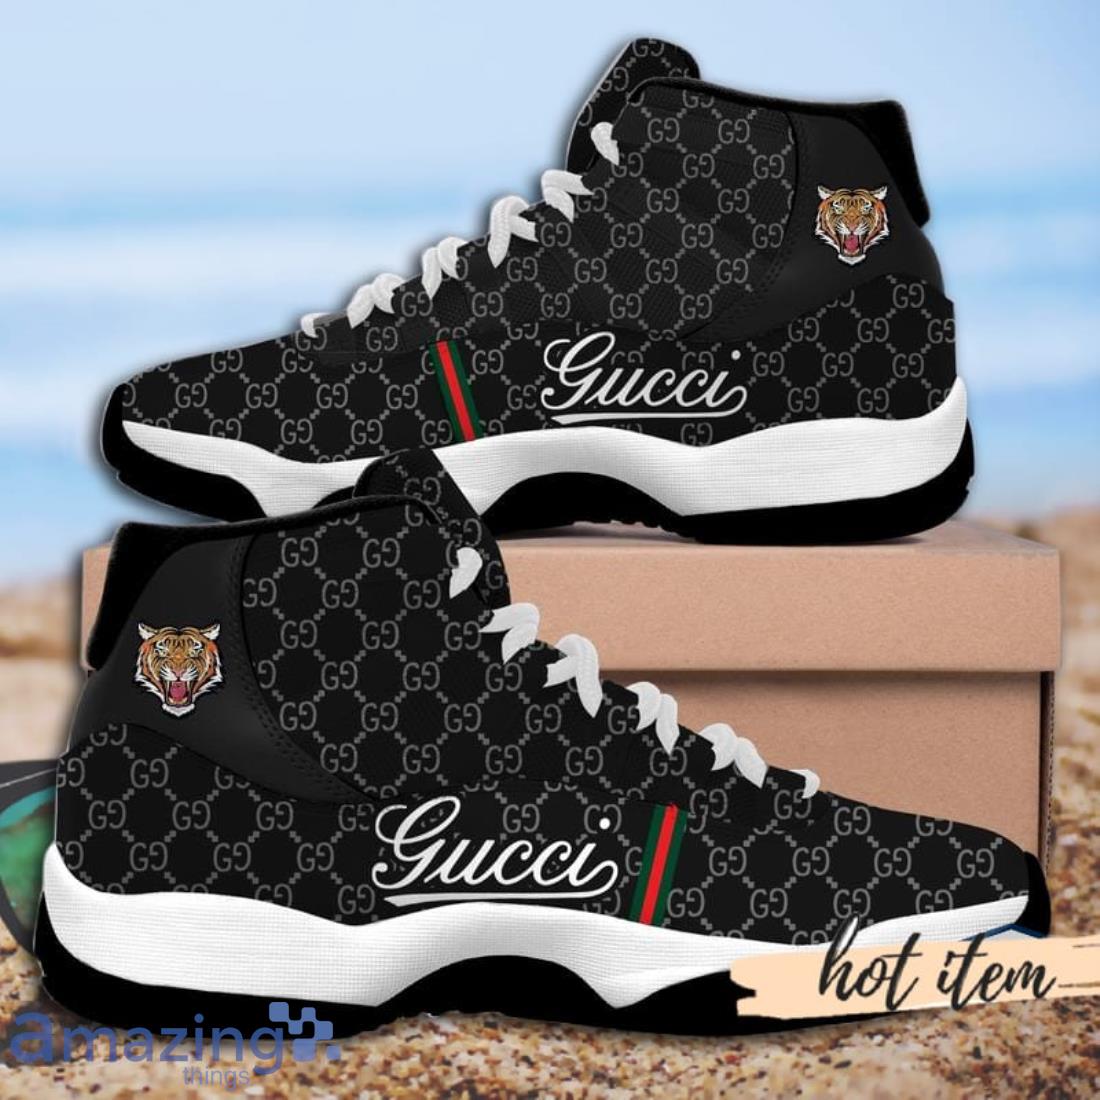 Tennessee Titans Nike Gucci Air Force Shoes -  Worldwide  Shipping